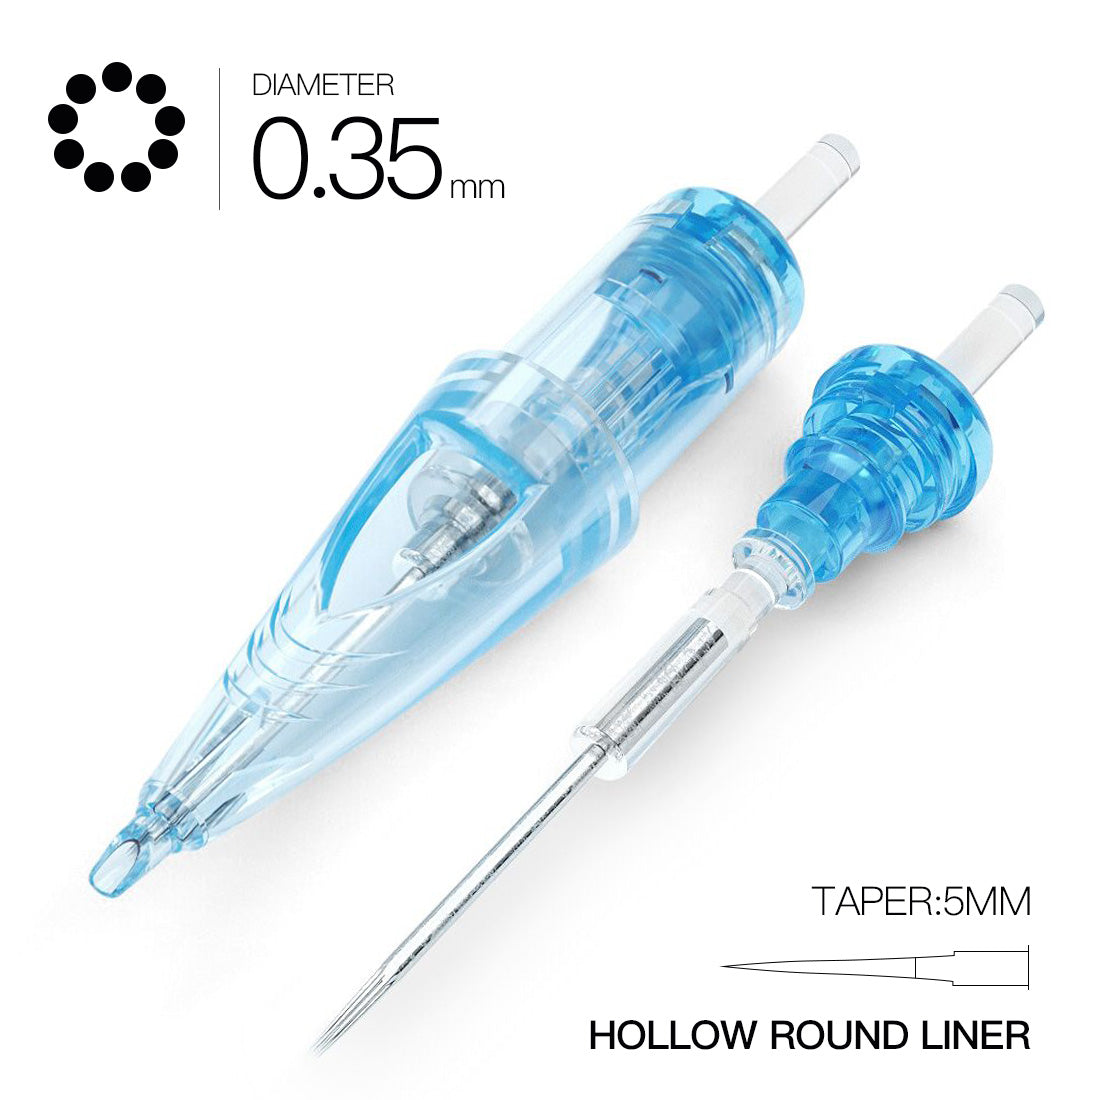 Hollow Needle Oiler with Oil - 12040